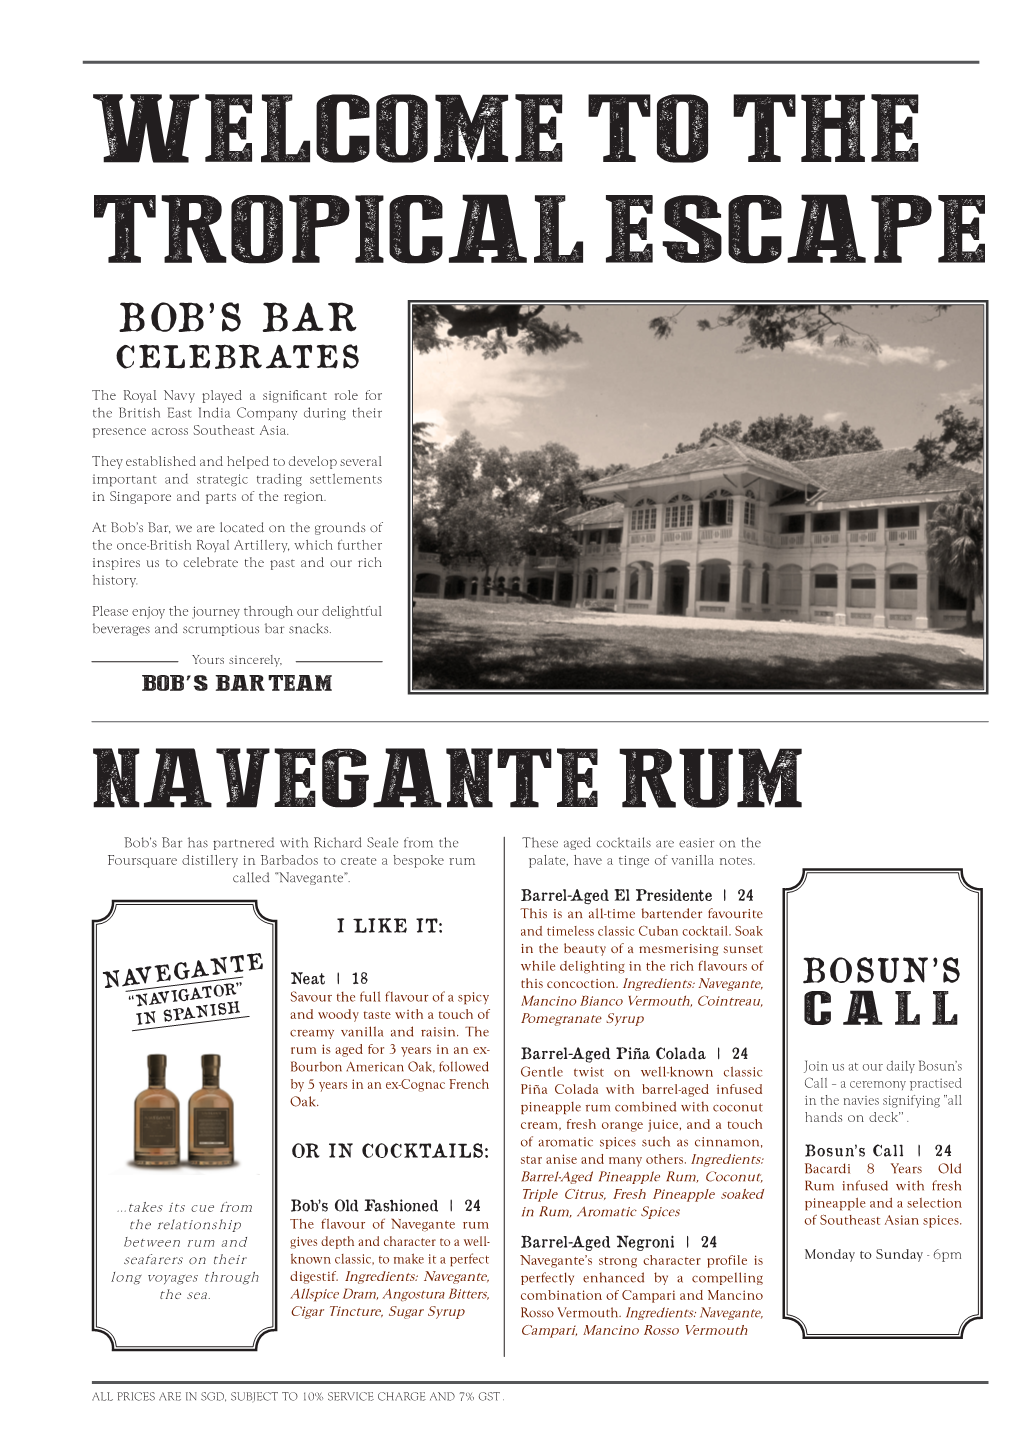 THE TROPICAL ESCAPE BOB’S BAR CELEBRATES the Royal Navy Played a Significant Role for the British East India Company During Their Presence Across Southeast Asia